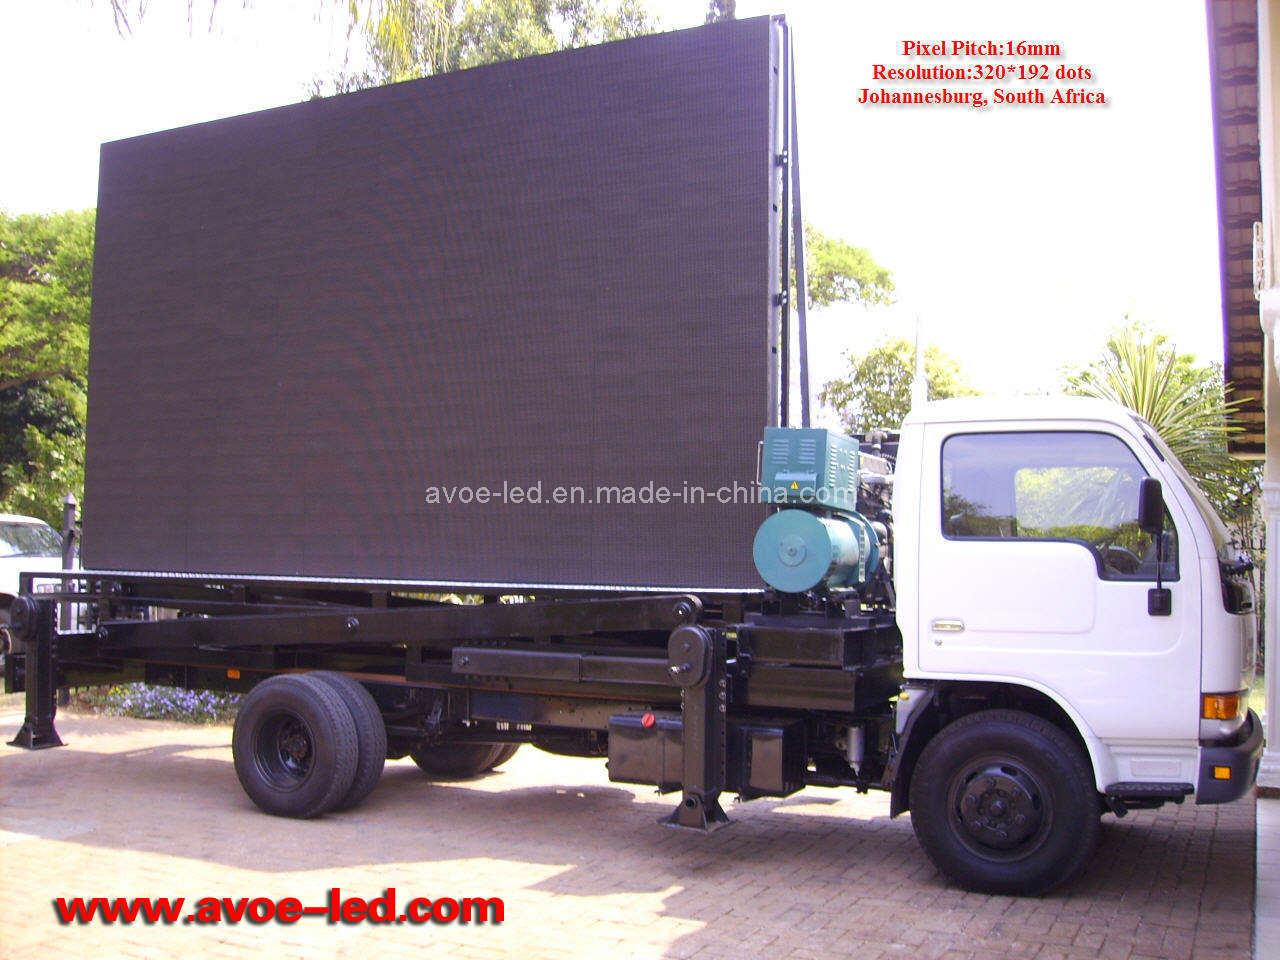 Truck Mobile LED Display (AE-P014)